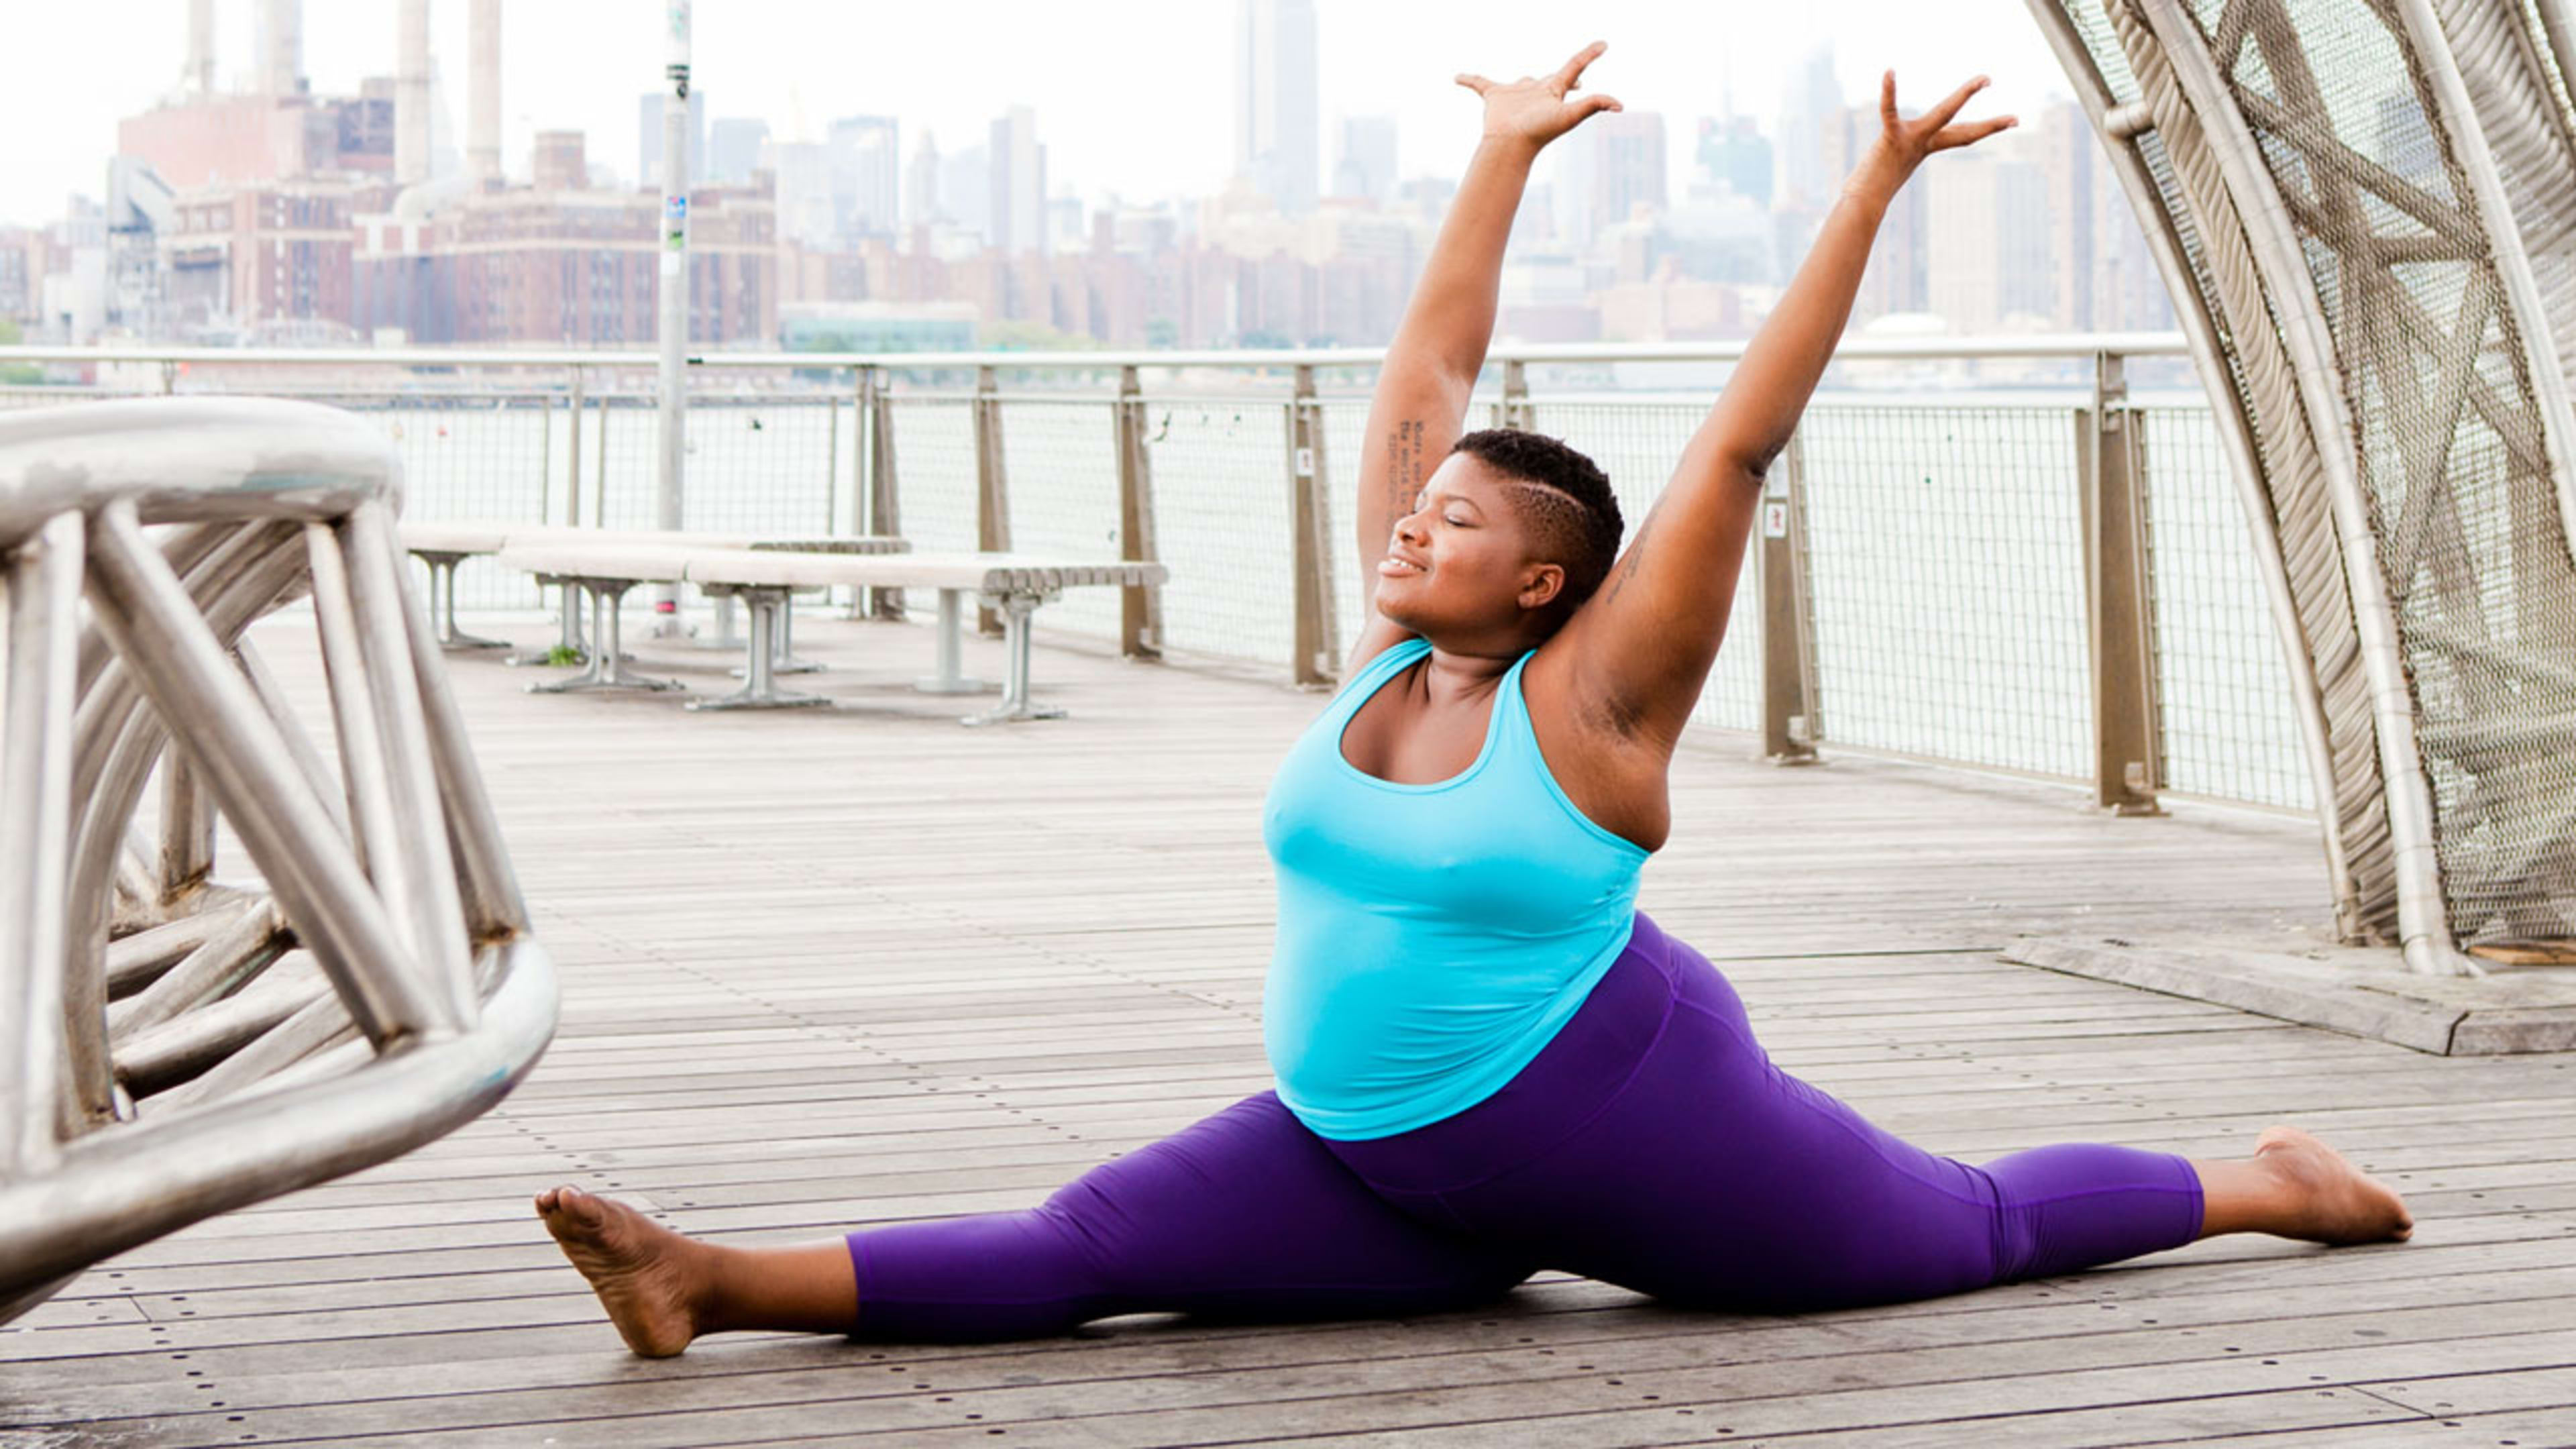 How This “Fat Femme” Yoga Instructor Is Reshaping The $3 Trillion Wellness Industry